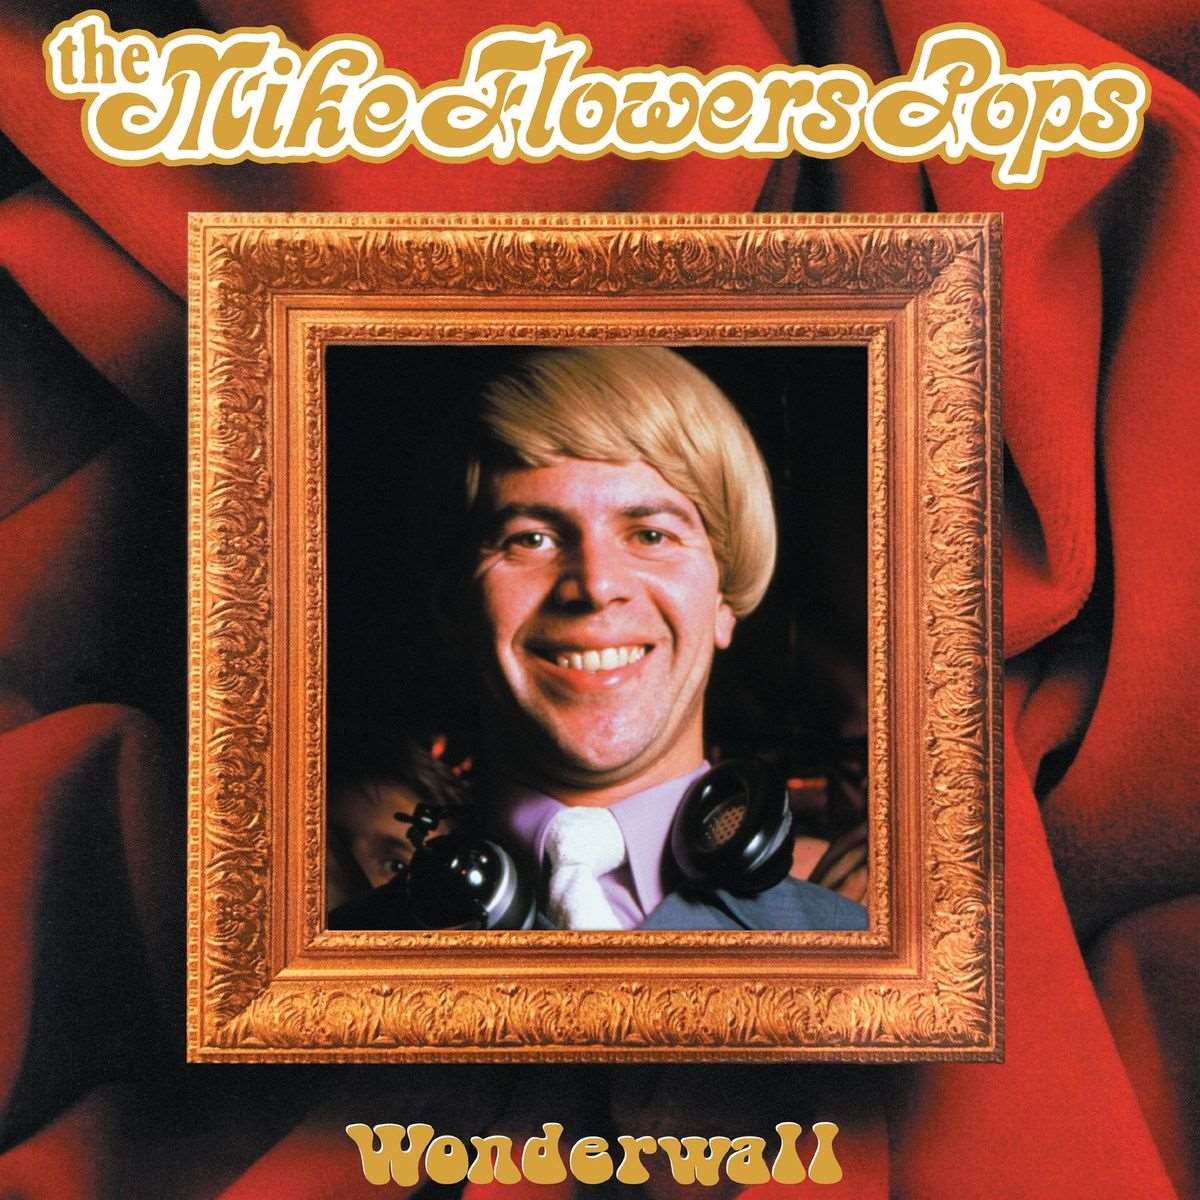 Mike Flowers Pops, The - Wonderwall - The Vault Collective ltd